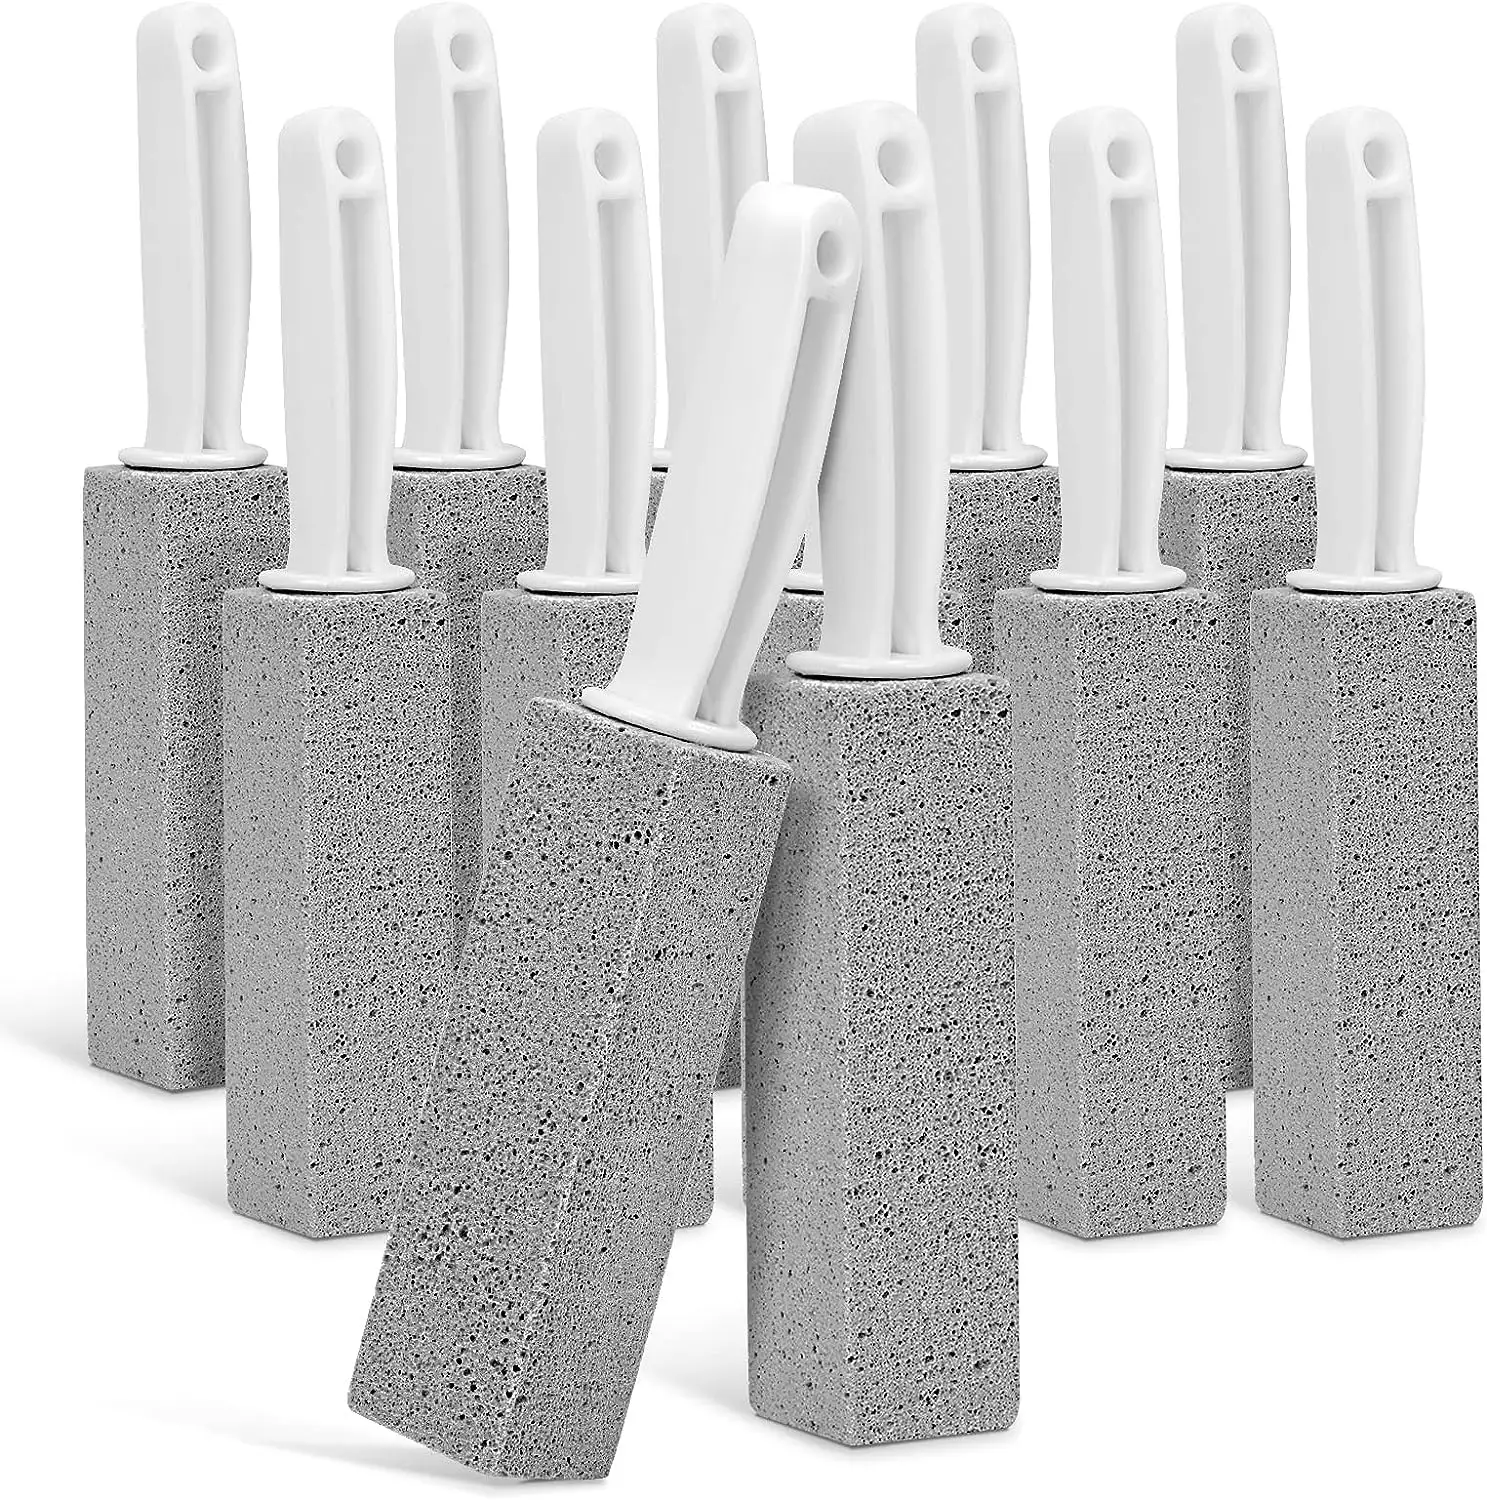 Stone Toilet Bowl Clean Brush with Handle Pumice Scouring Pad Stick Cleaner for Cleaning Toilet